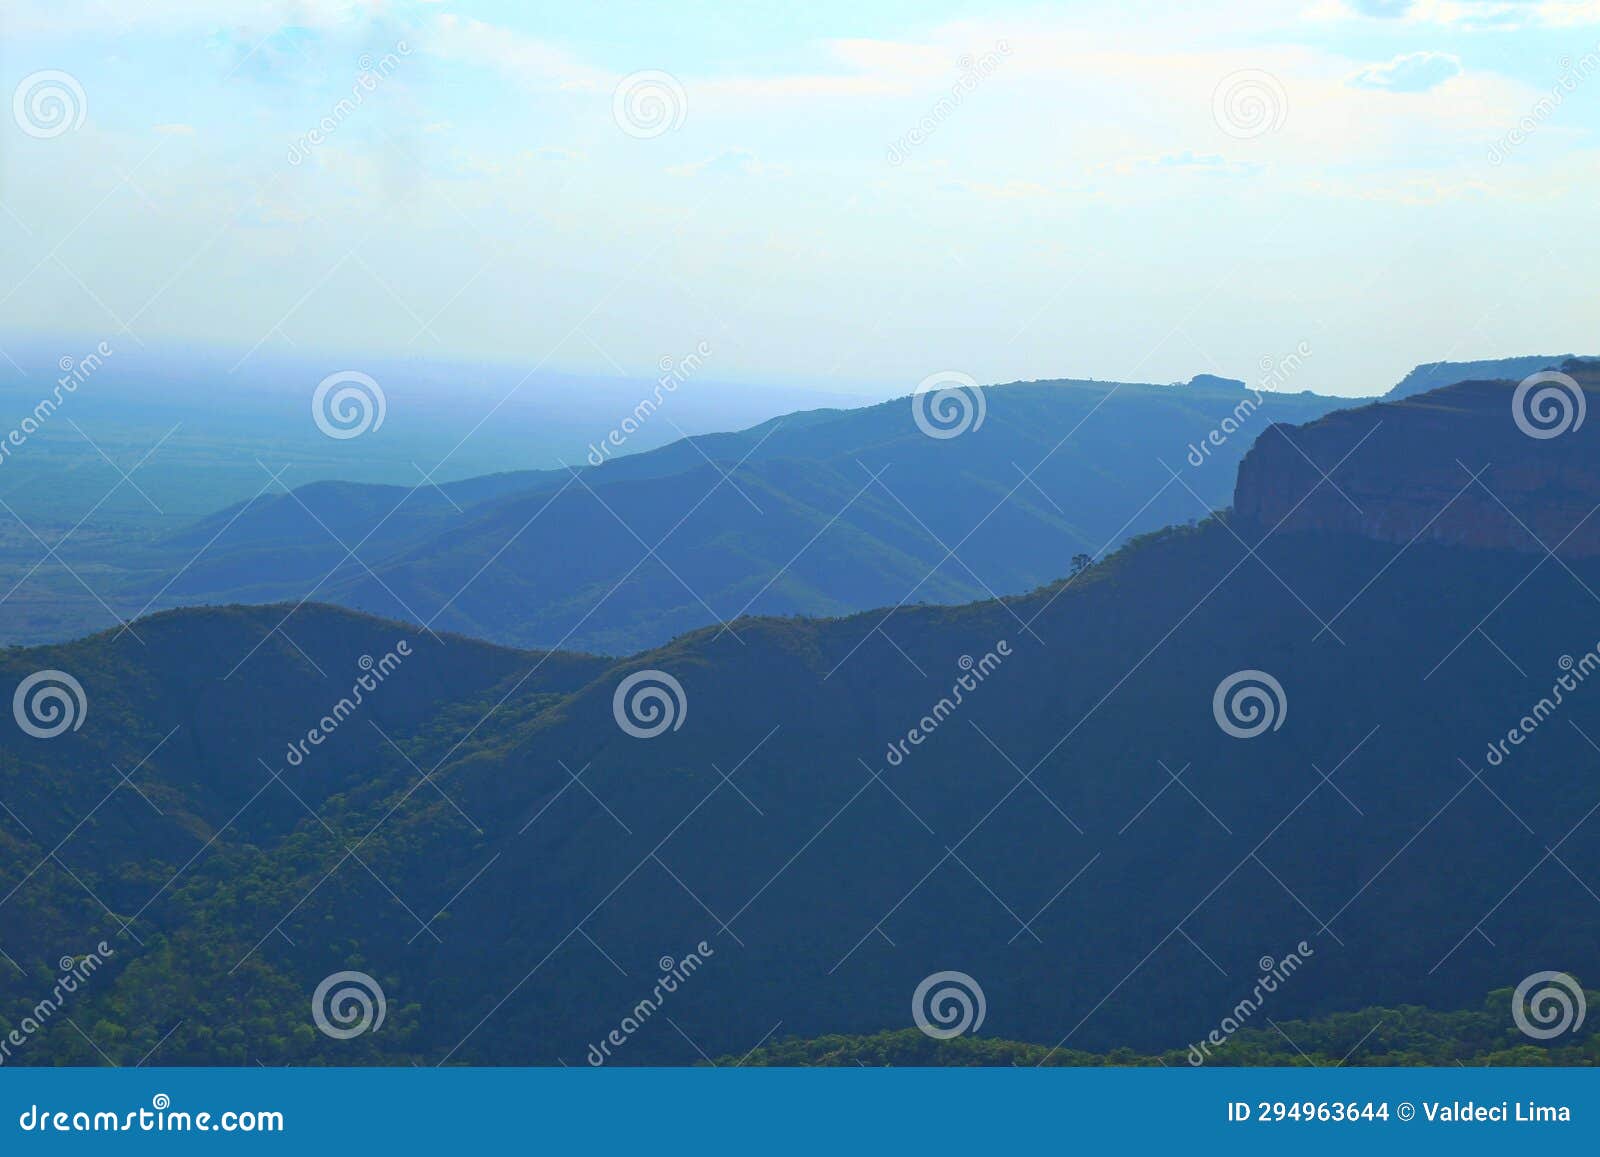 blue mountains with color scale on foggy day